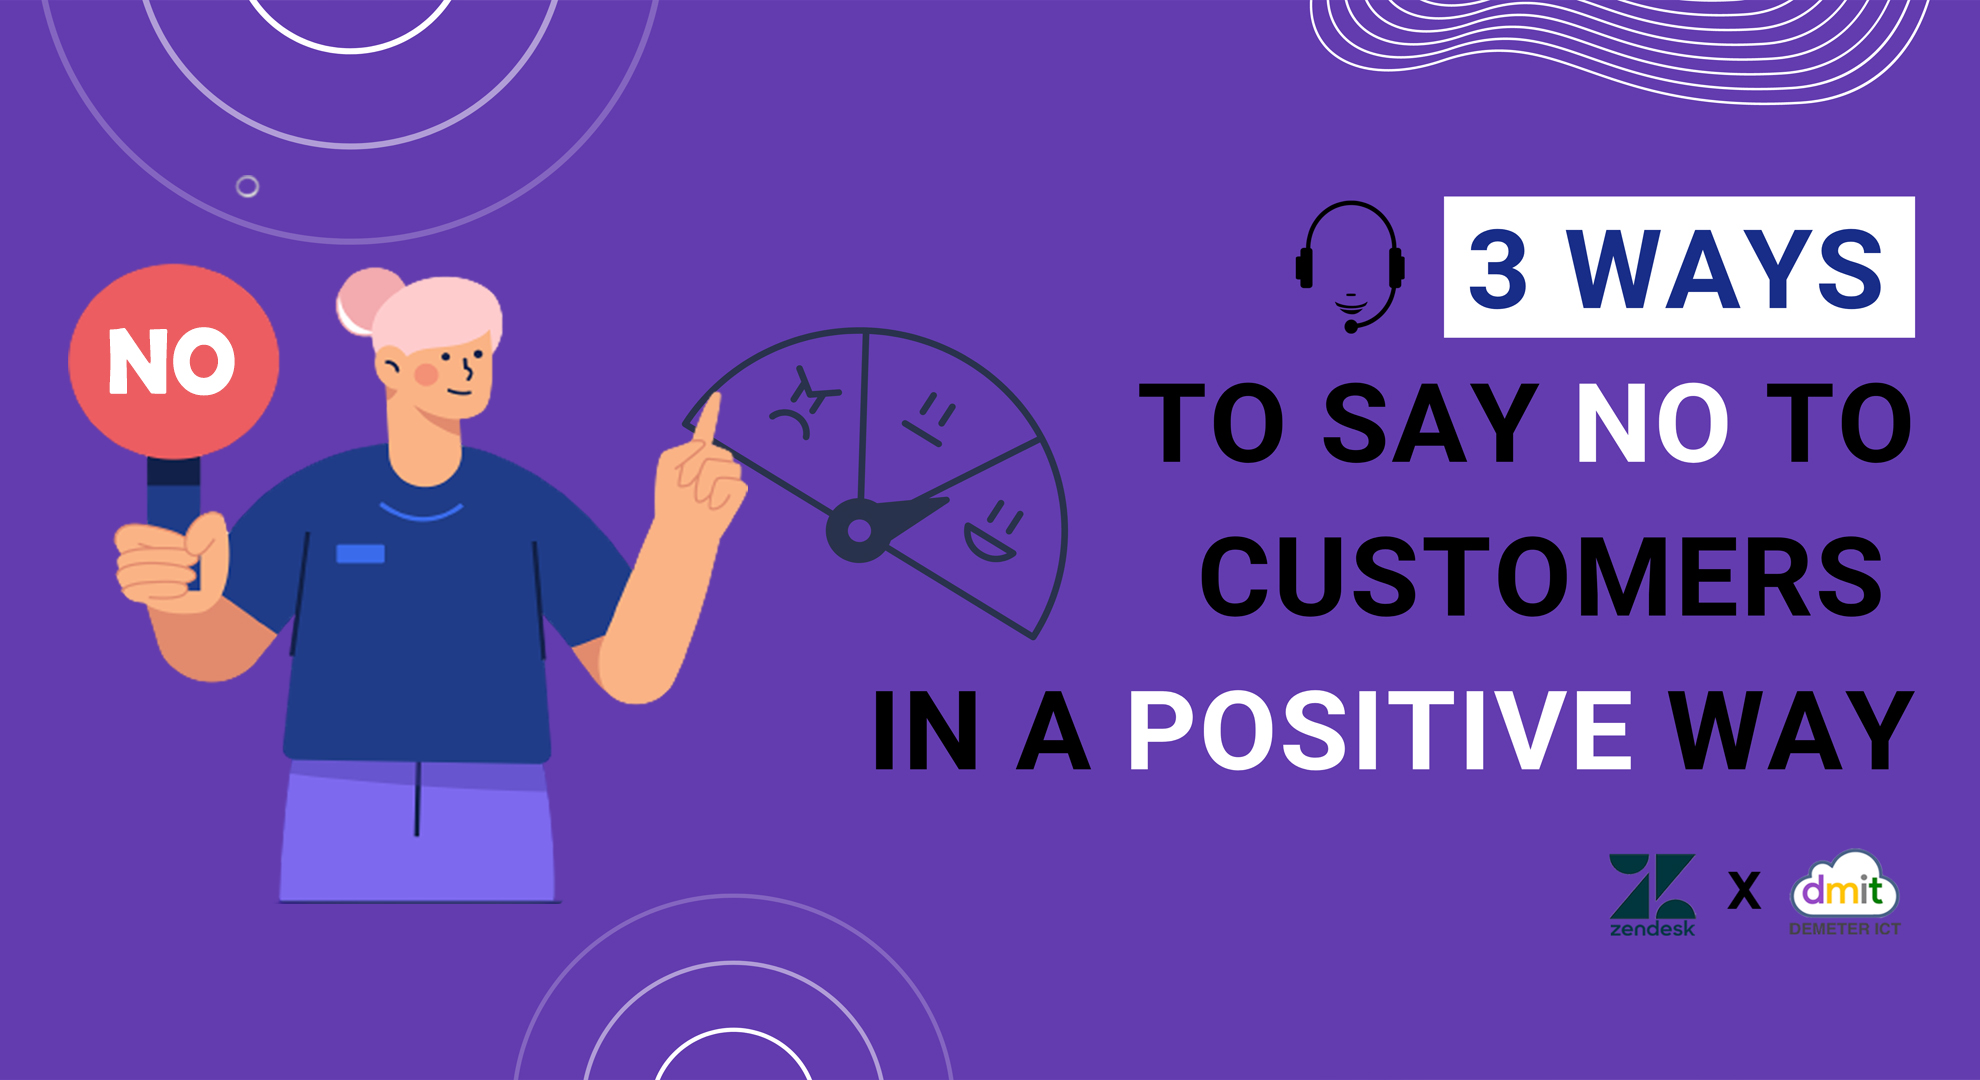 3 ways to say no to customers in a positive way_eng